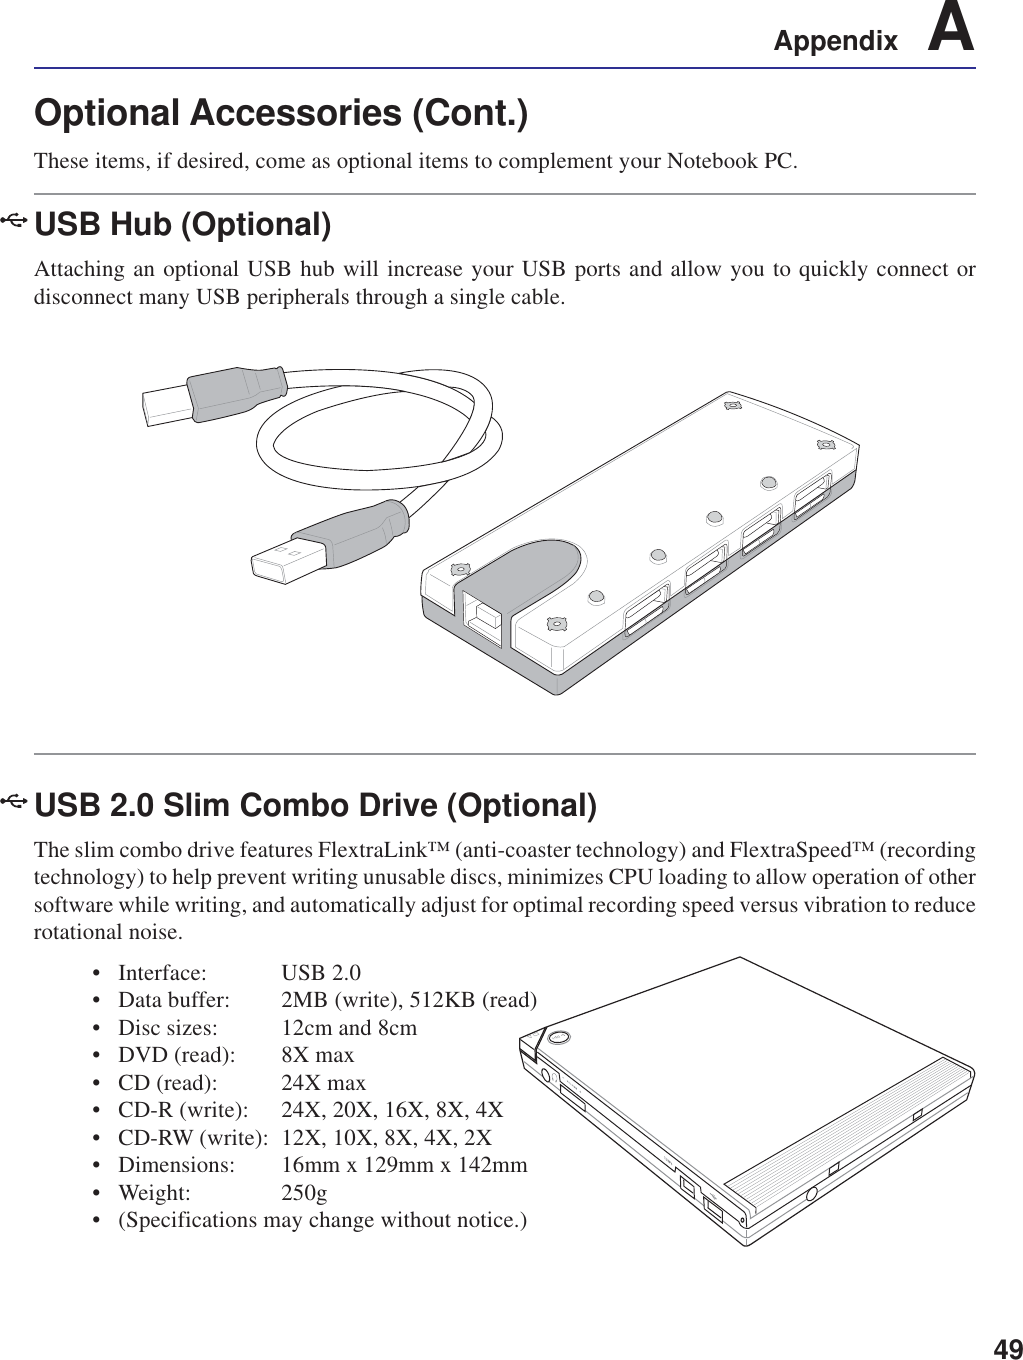 49Appendix    AOptional Accessories (Cont.)These items, if desired, come as optional items to complement your Notebook PC.USB Hub (Optional)Attaching an optional USB hub will increase your USB ports and allow you to quickly connect ordisconnect many USB peripherals through a single cable.USB 2.0 Slim Combo Drive (Optional)The slim combo drive features FlextraLink™ (anti-coaster technology) and FlextraSpeed™ (recordingtechnology) to help prevent writing unusable discs, minimizes CPU loading to allow operation of othersoftware while writing, and automatically adjust for optimal recording speed versus vibration to reducerotational noise.• Interface: USB 2.0• Data buffer: 2MB (write), 512KB (read)• Disc sizes: 12cm and 8cm• DVD (read): 8X max• CD (read): 24X max• CD-R (write): 24X, 20X, 16X, 8X, 4X• CD-RW (write): 12X, 10X, 8X, 4X, 2X• Dimensions: 16mm x 129mm x 142mm• Weight: 250g• (Specifications may change without notice.)